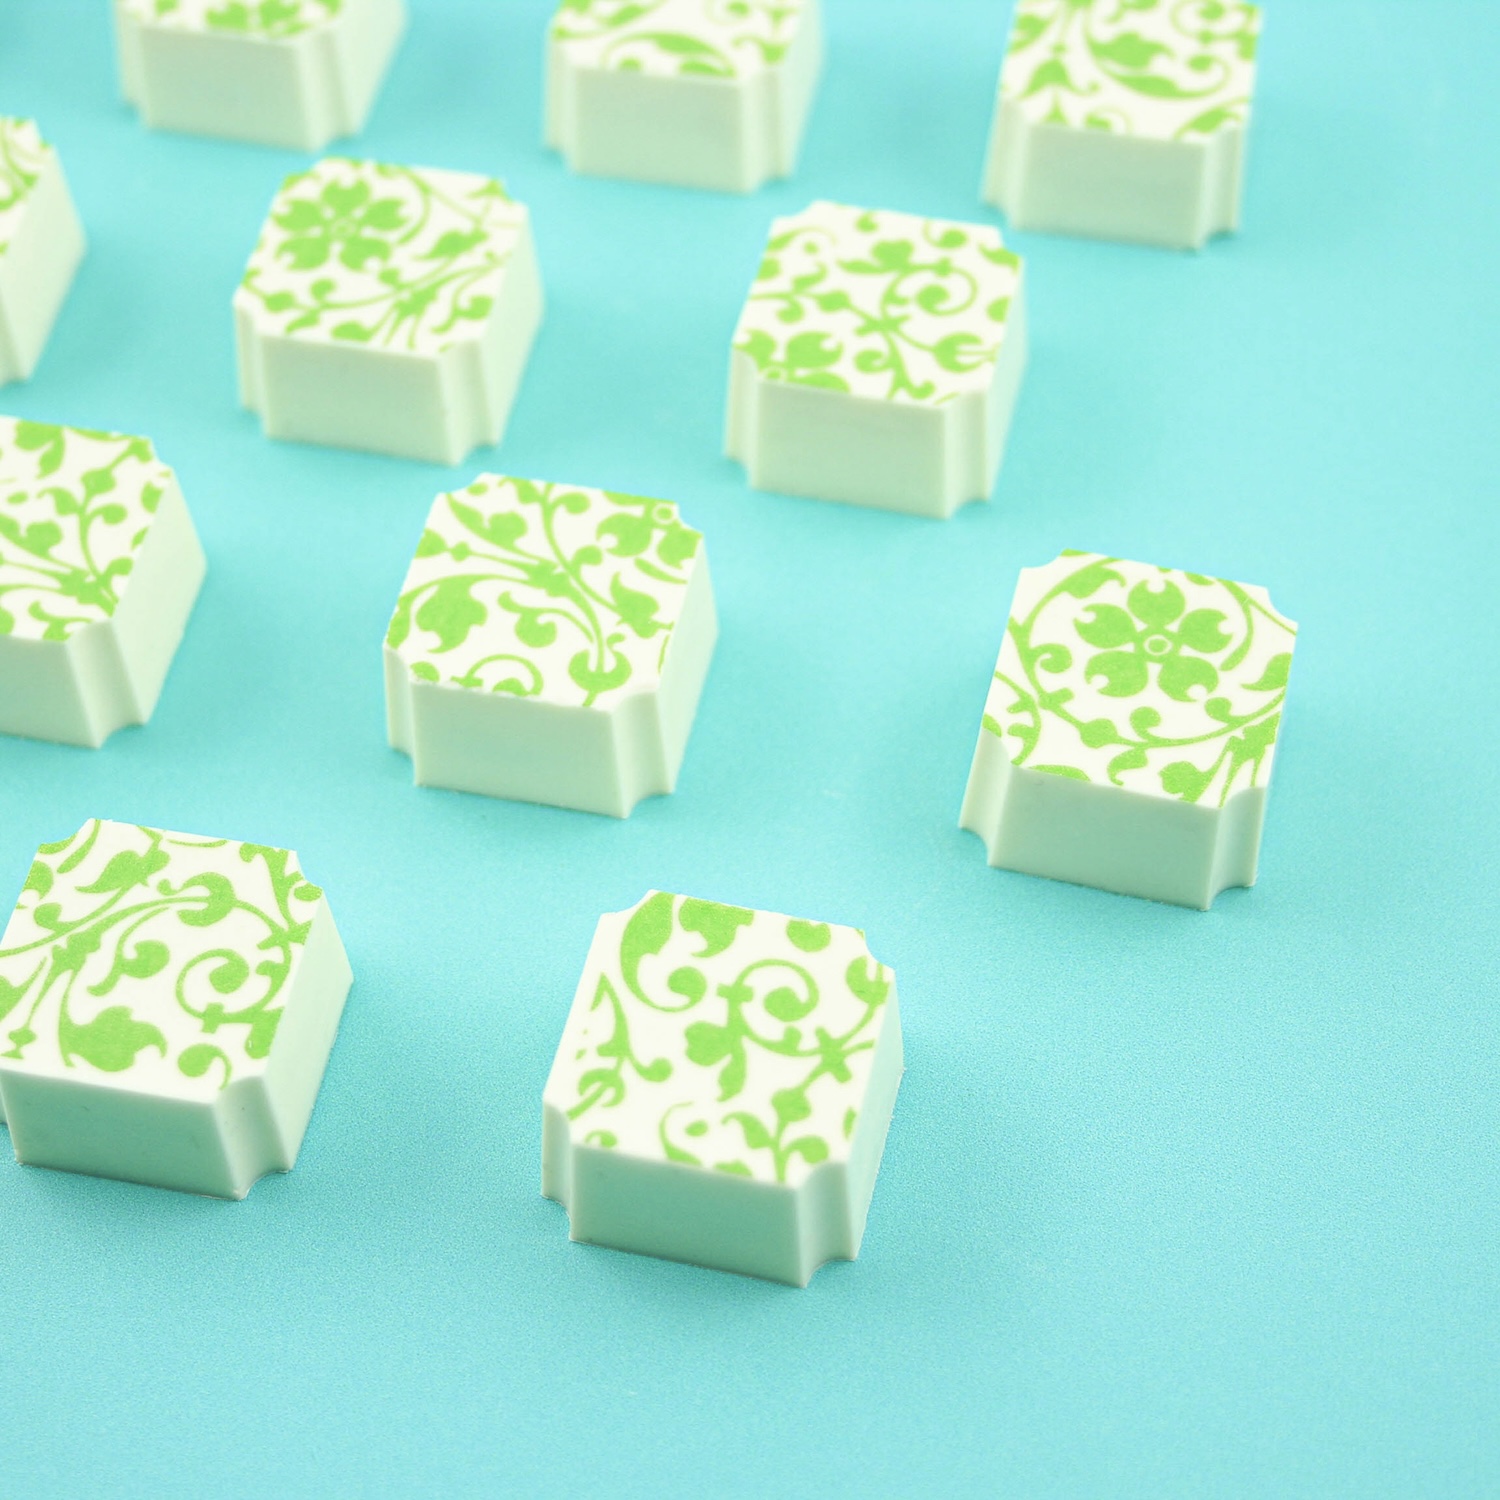 White Chocolate creme de menthe filled bonbons with a green swirl transfer decoration